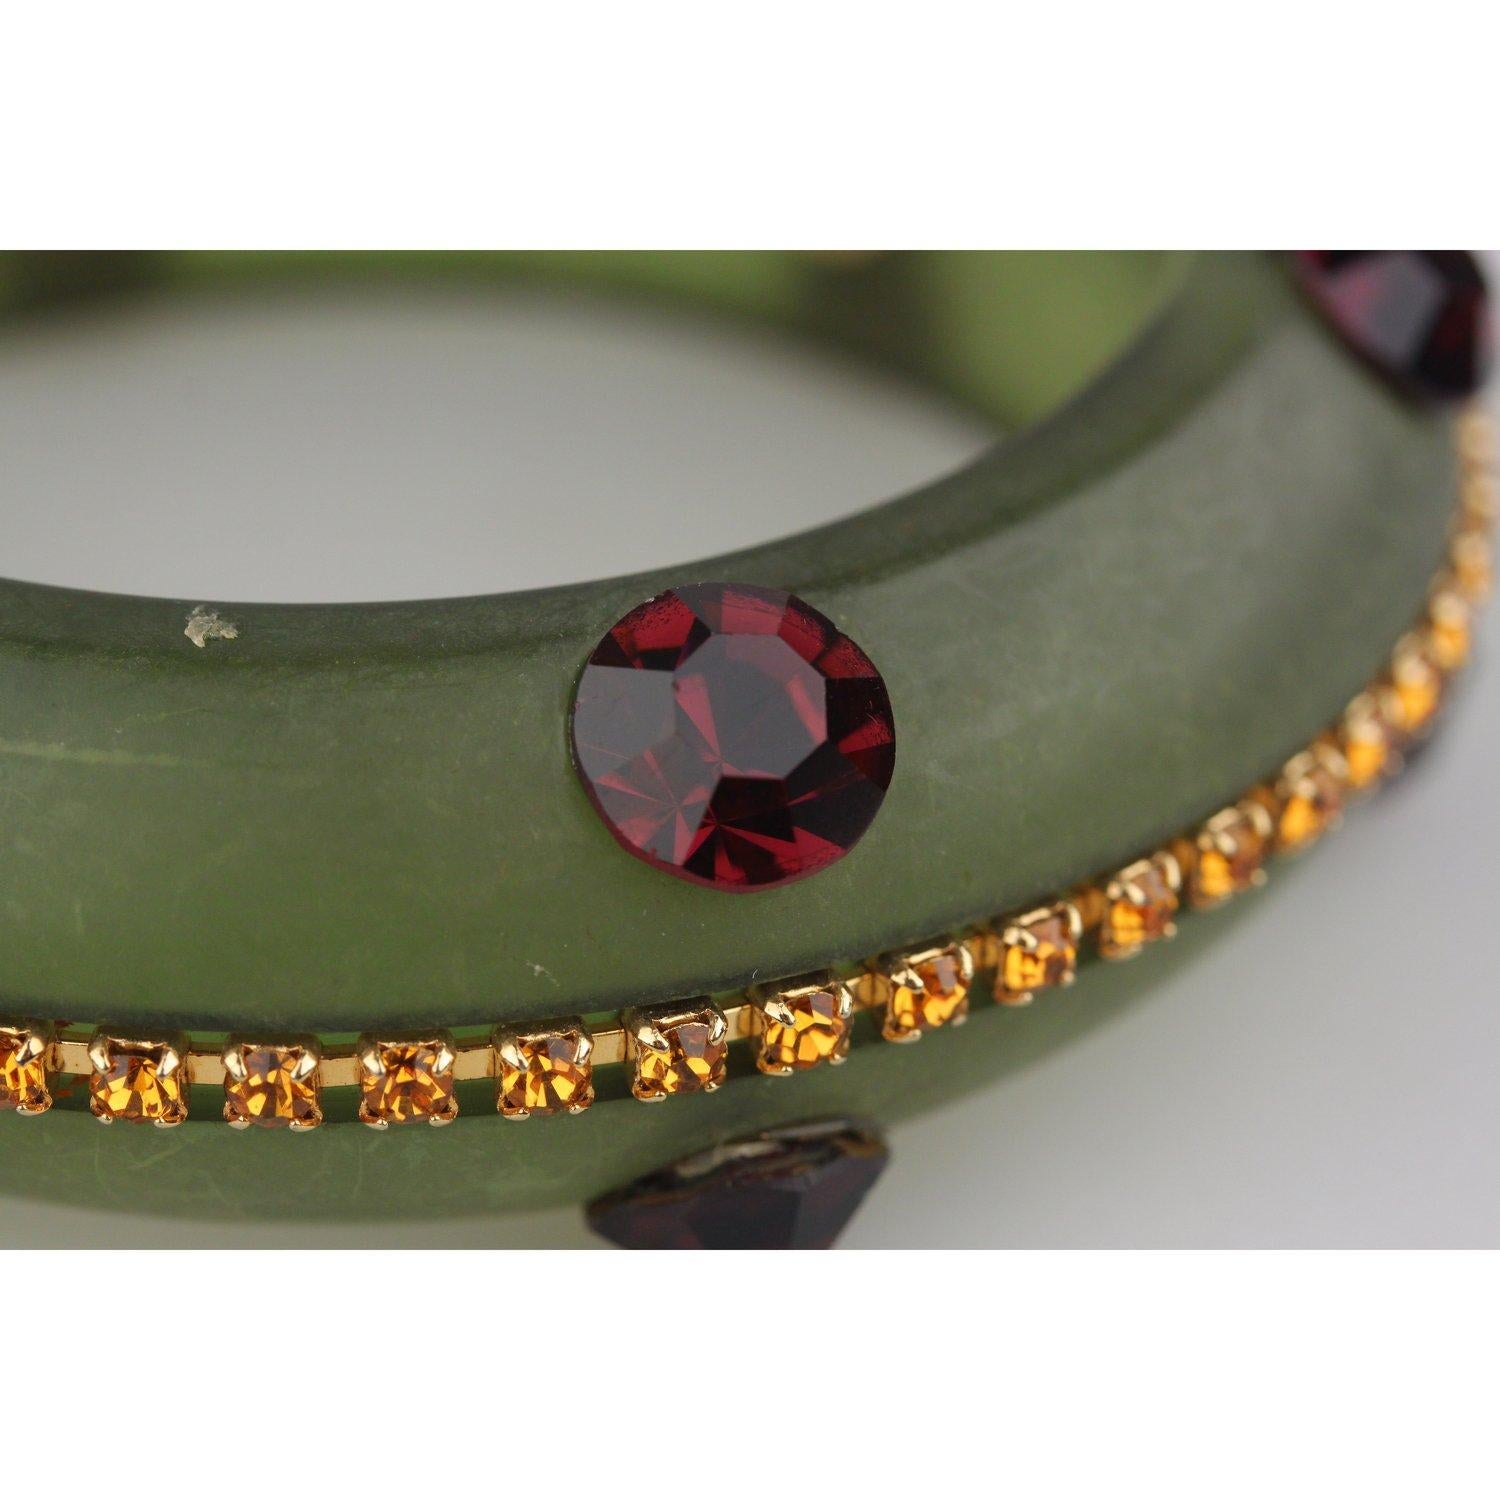 Haute Couture Bracelet created by Gianni De Liguoro in green satin acrylic resin.  Beautiful decoration made of orange and purple crystals Bangle  design. De Liguoro signature metal tab intenally. Height:1 inch - 2,5 cm - Inner diameter: 2,6 inches